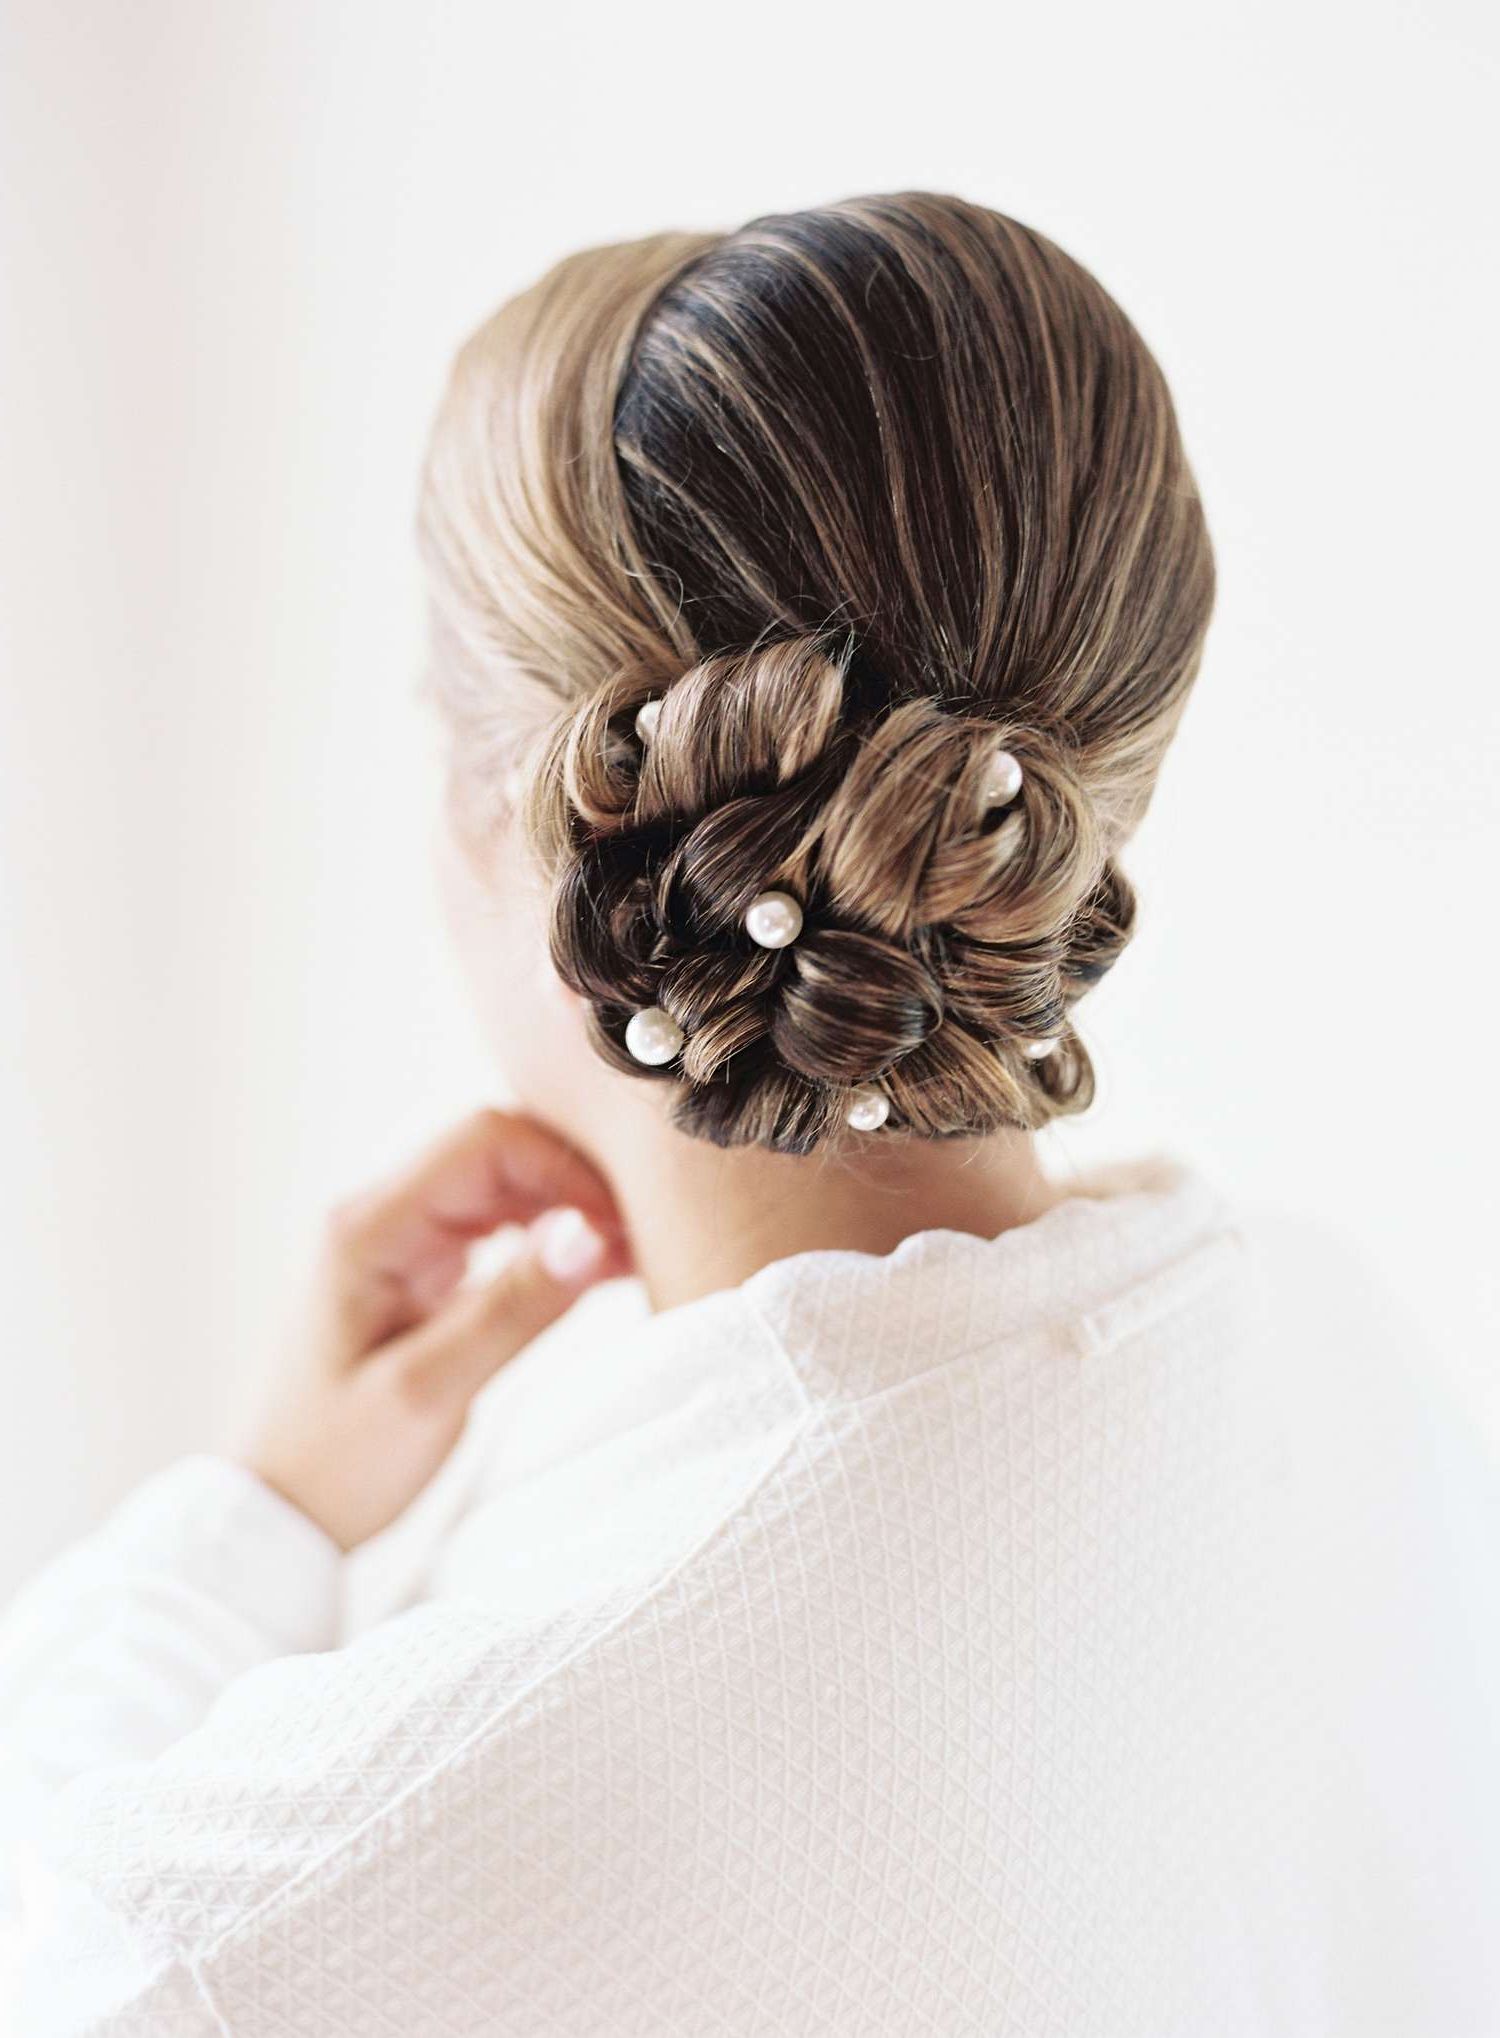 10 Low Bun Wedding Hairstyles For Every Type Of Bride Regarding Low Chignon Updo (View 10 of 28)